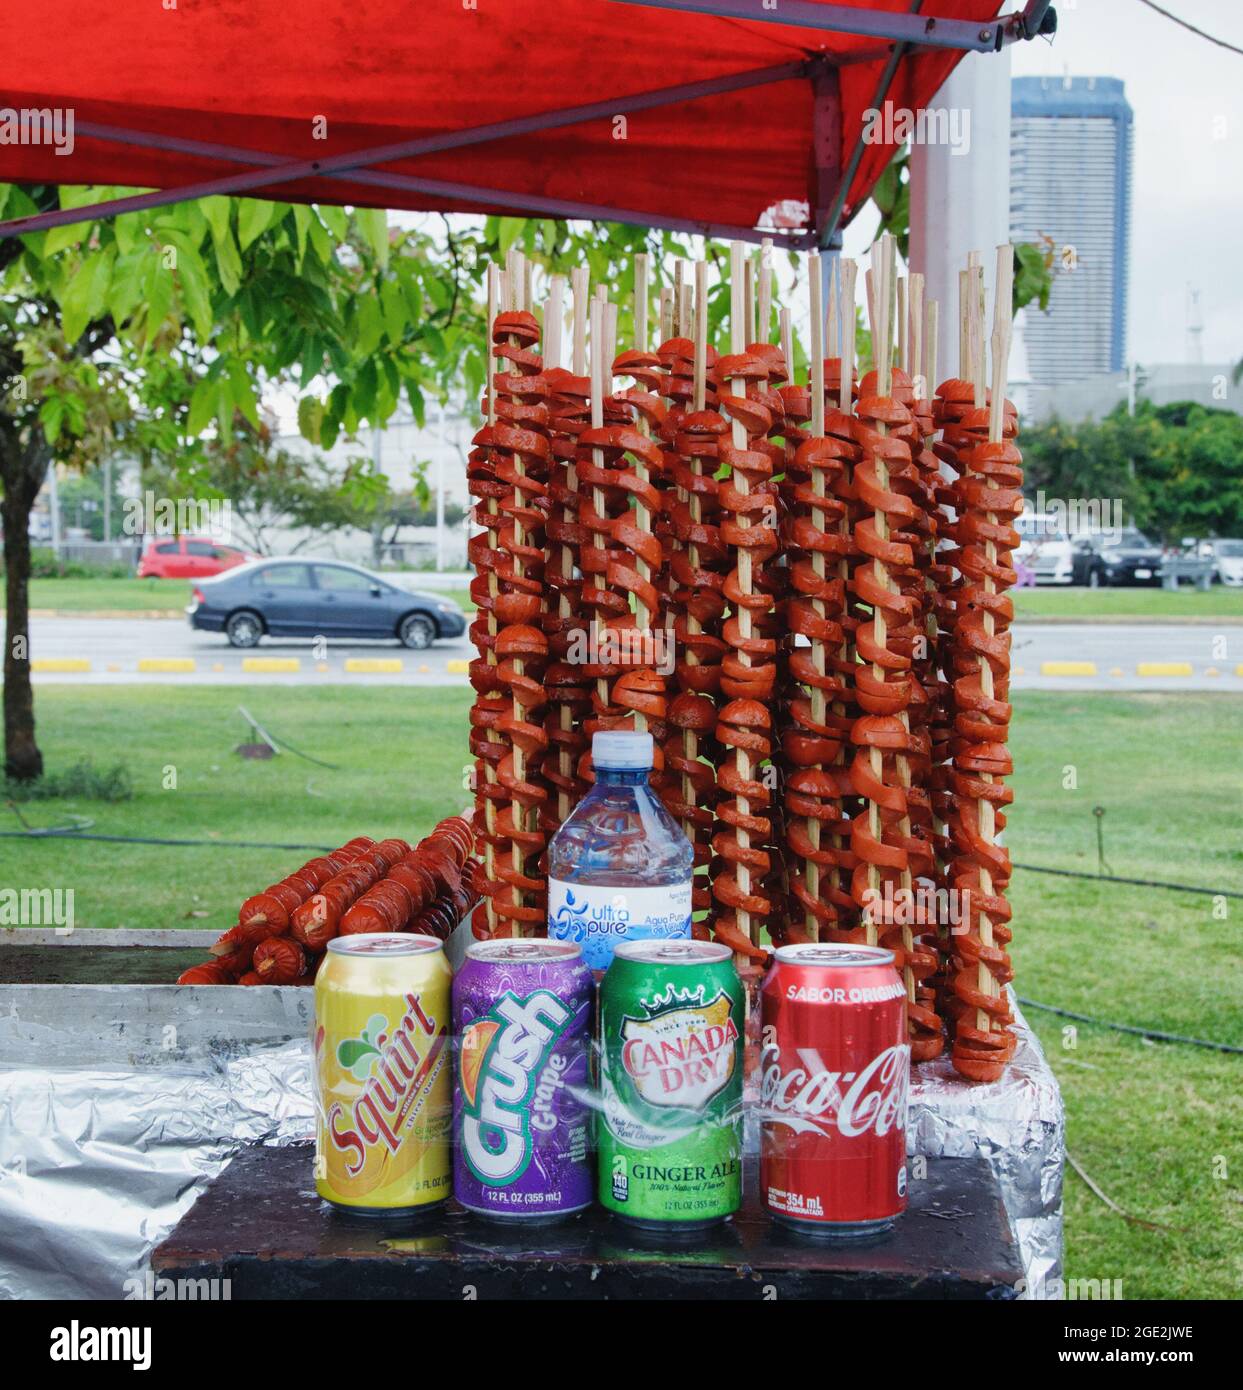 Cans on drinks and doughnuts on spikes as part of a hawker stall selling food and drink, Panama City, Panama, Central America Stock Photo